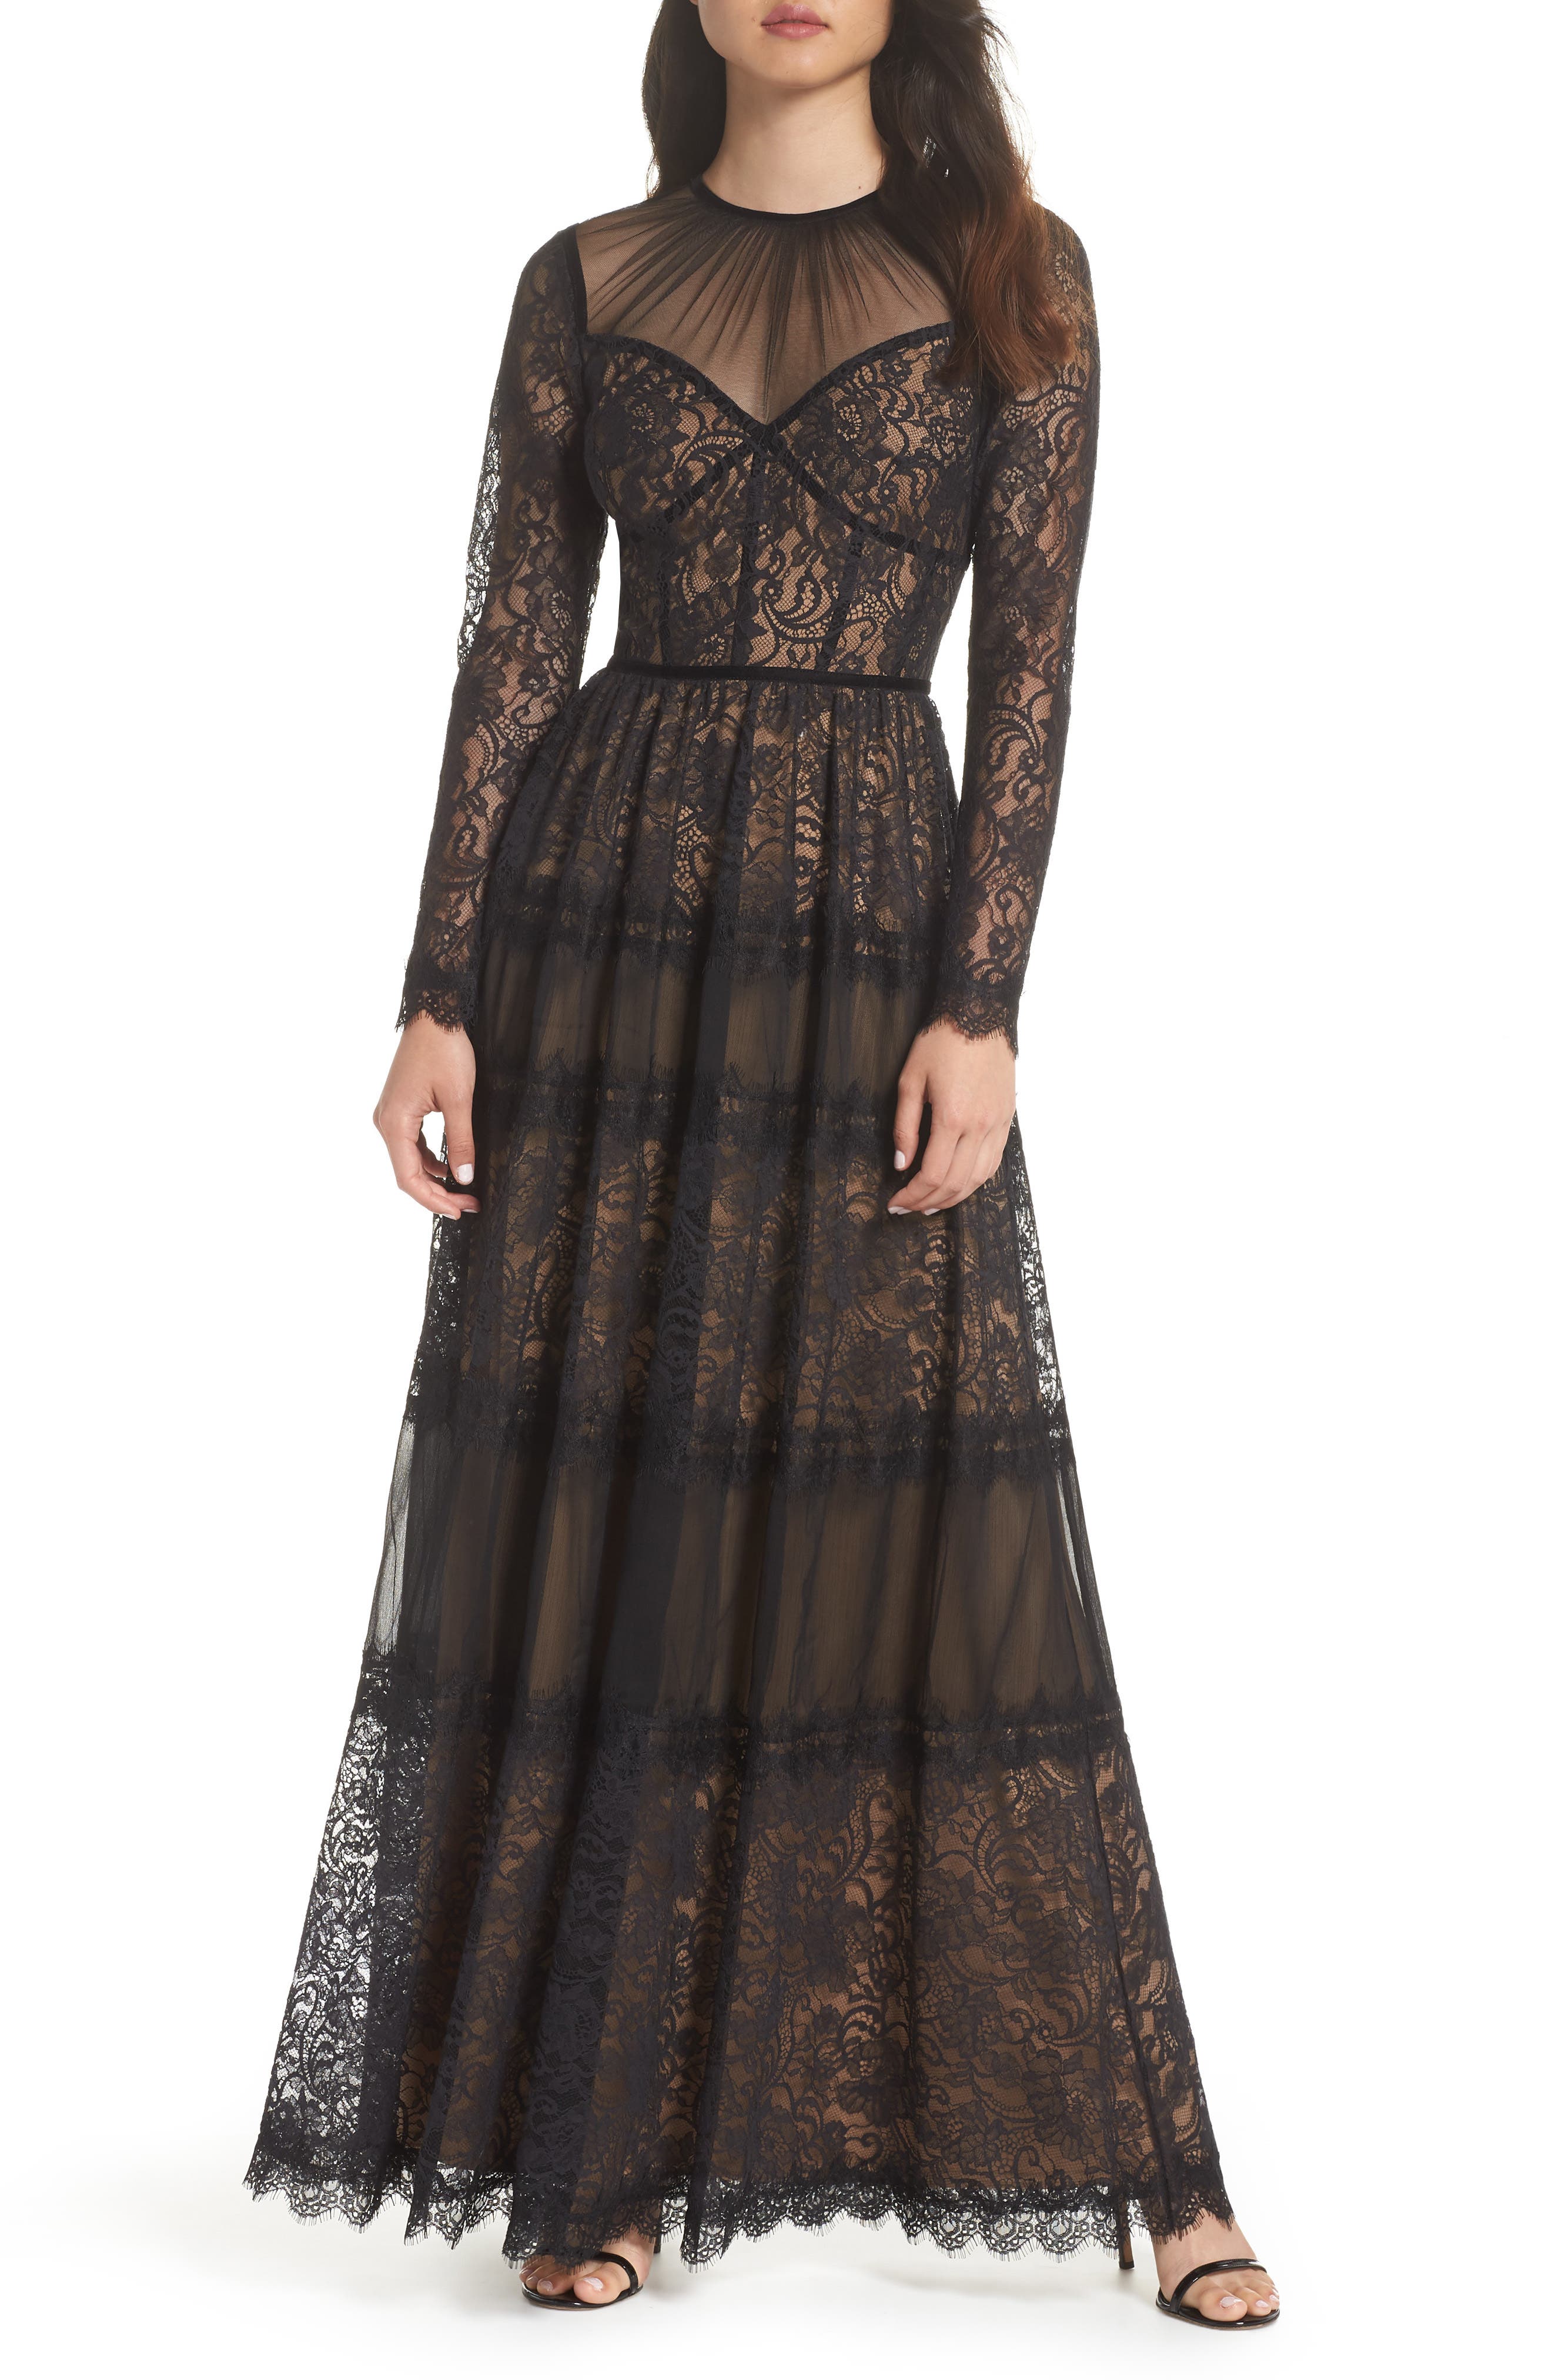 Edwardian Gowns: Inspired Evening and Formal Dresses